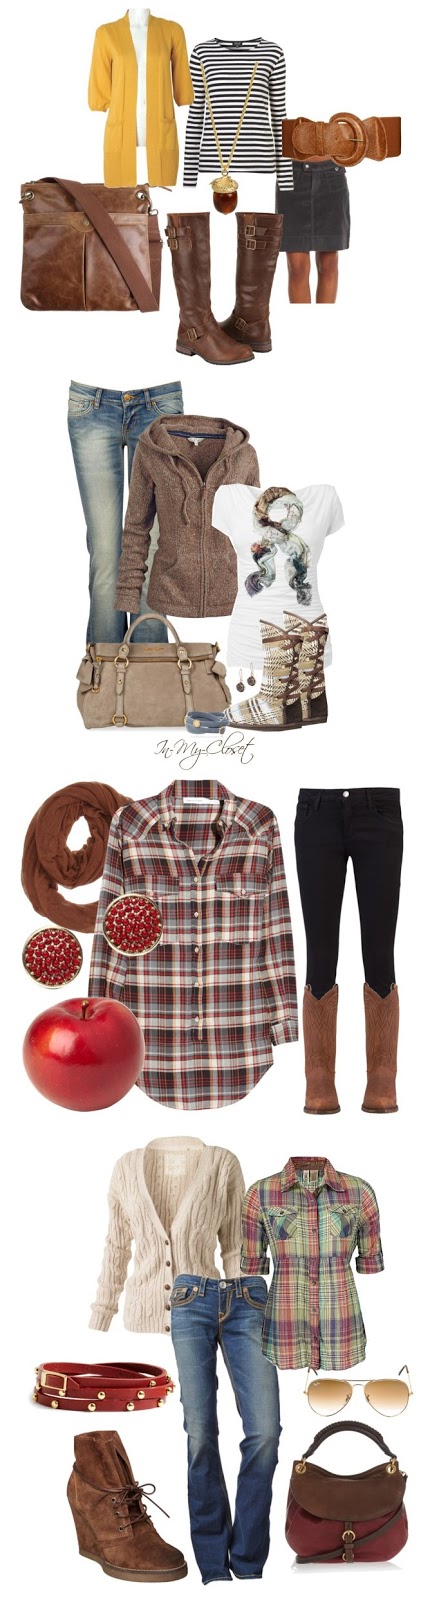 Fall Fashion ||  Fall Outfit Ideas  ||  Click through to see sources